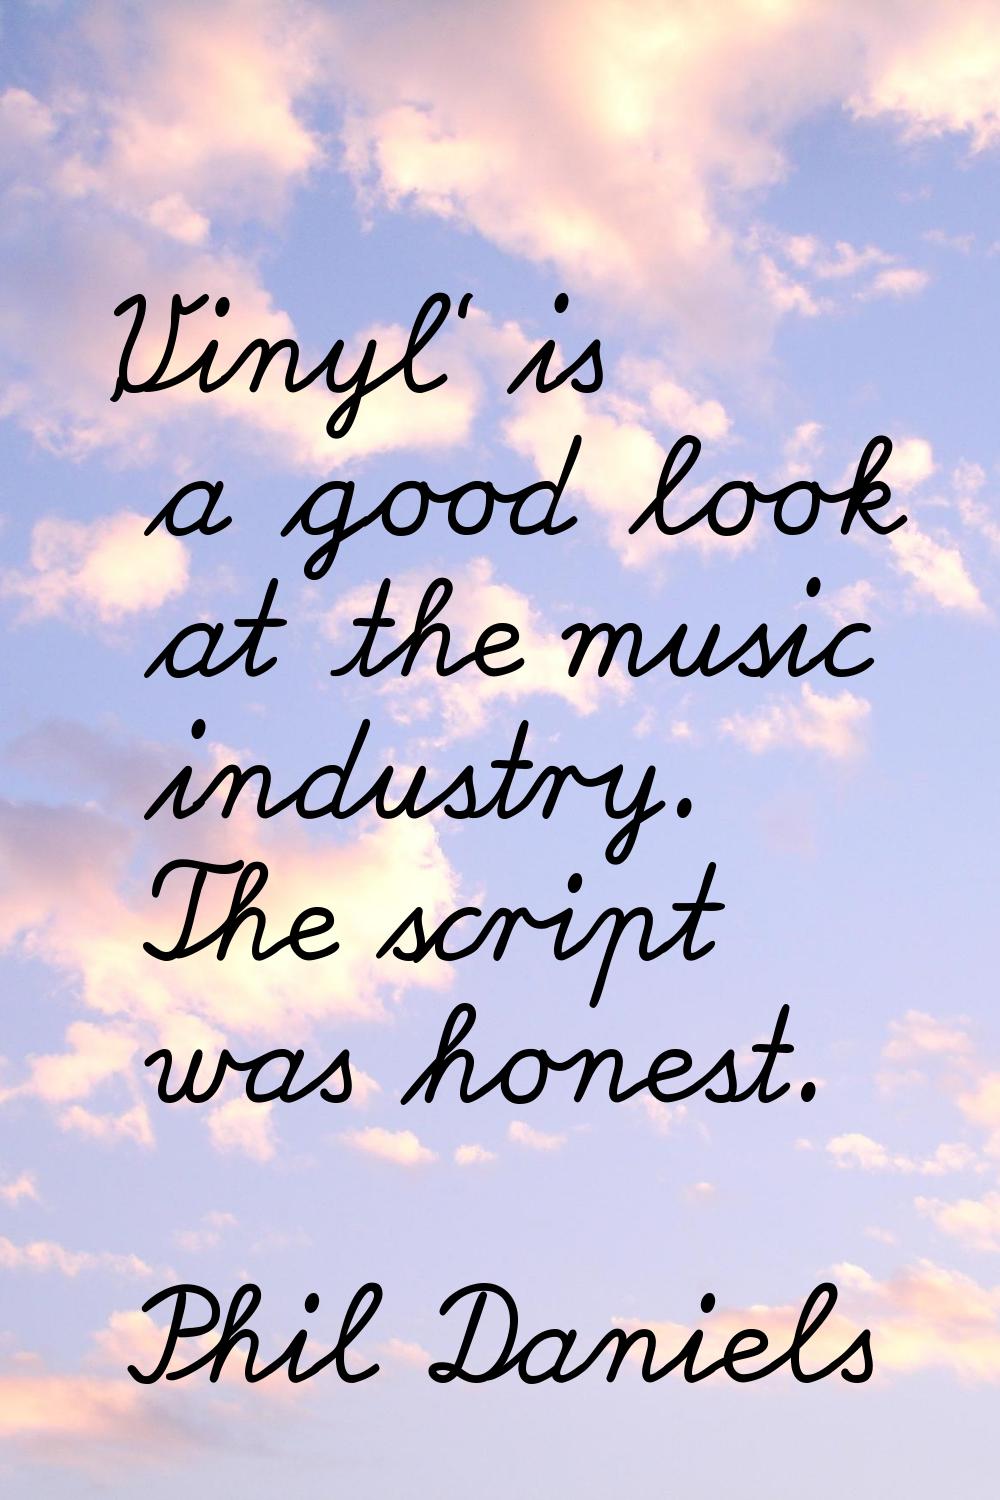 'Vinyl' is a good look at the music industry. The script was honest.